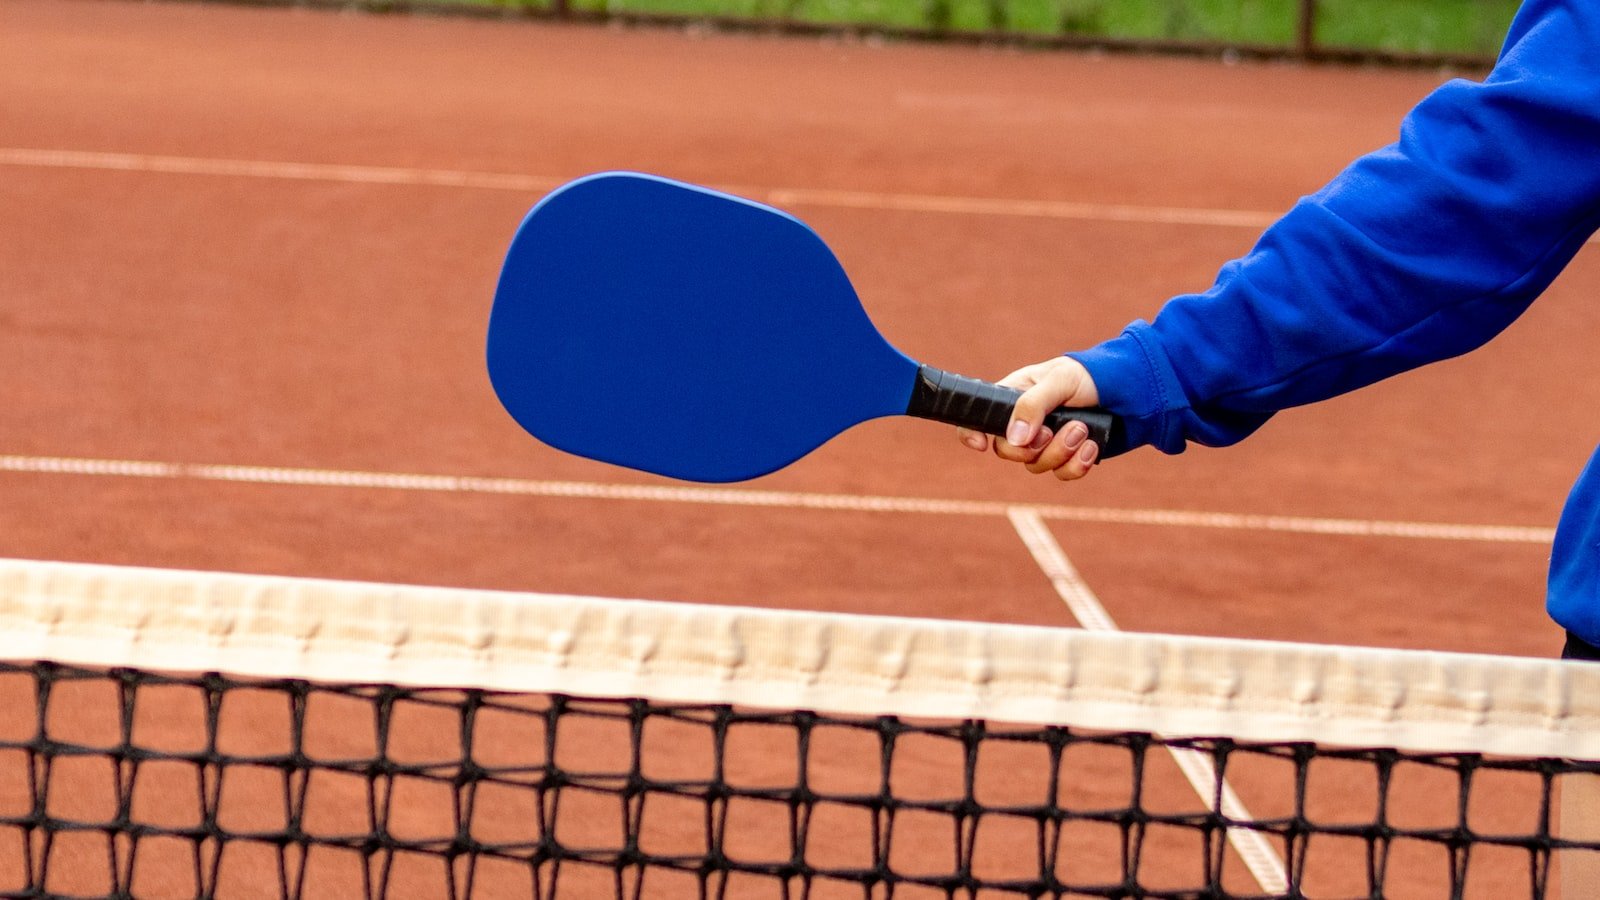 The Impact of Technological Advancements on Pickleball Tournaments